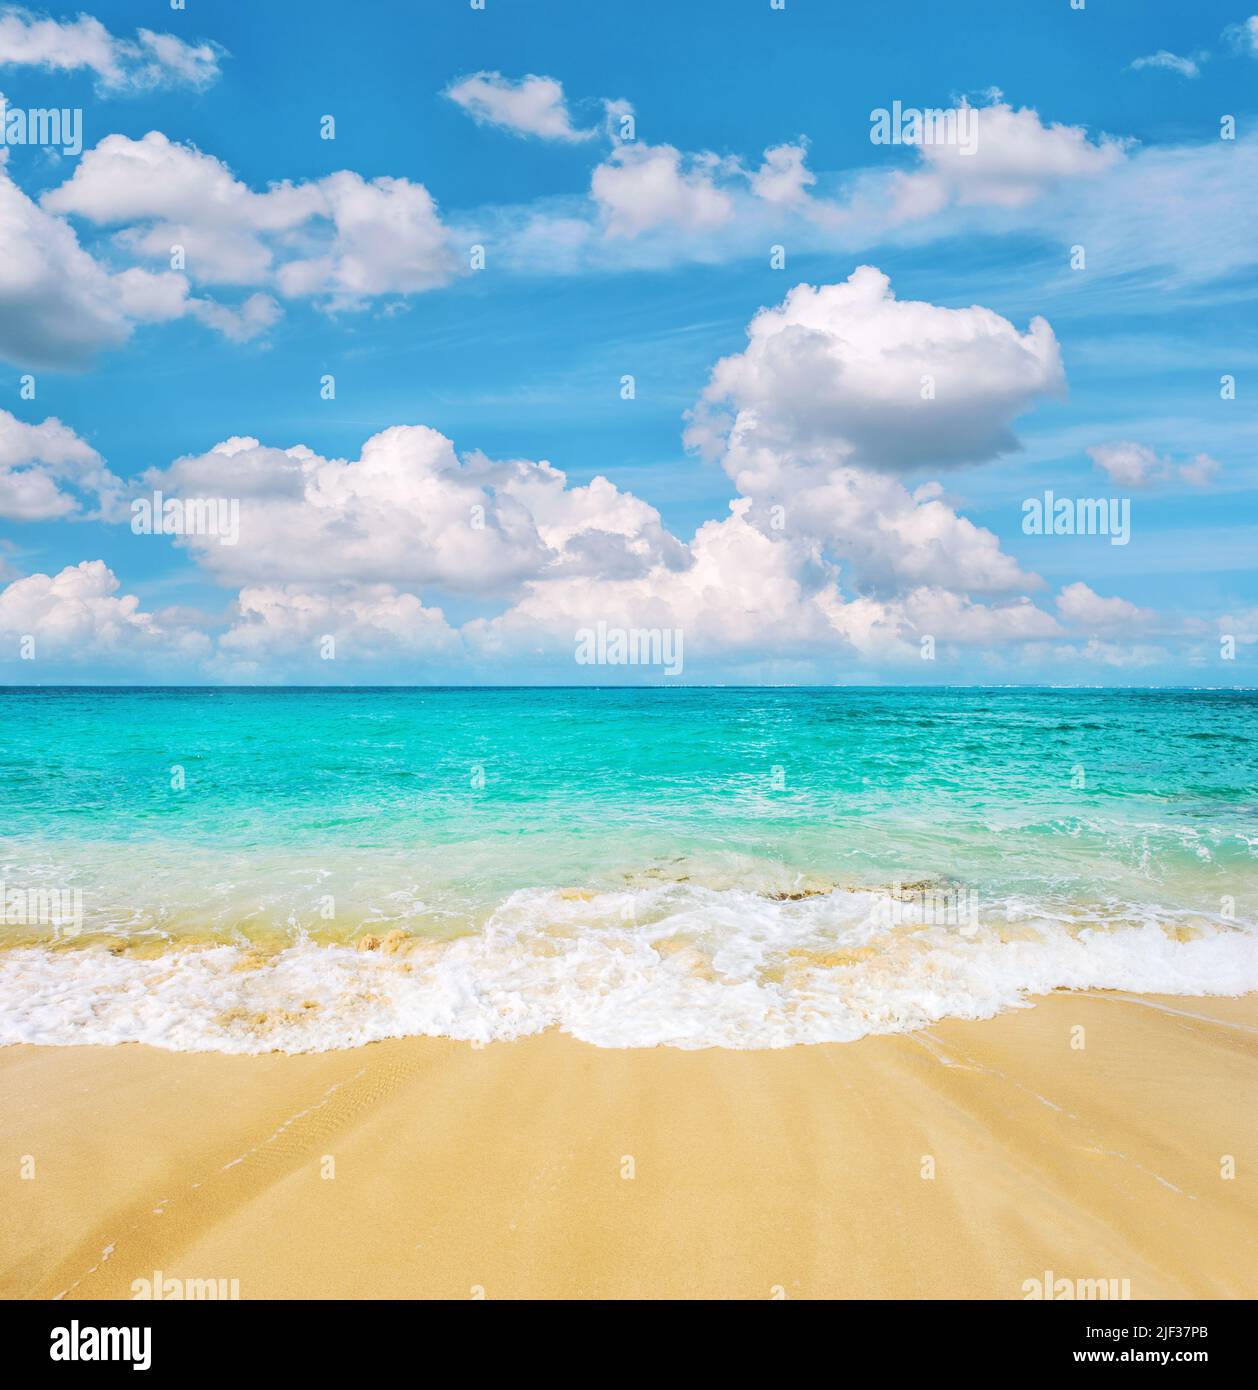 Sand beach, turquoise sea and cloudy blue sky. Summer travel background Stock Photo